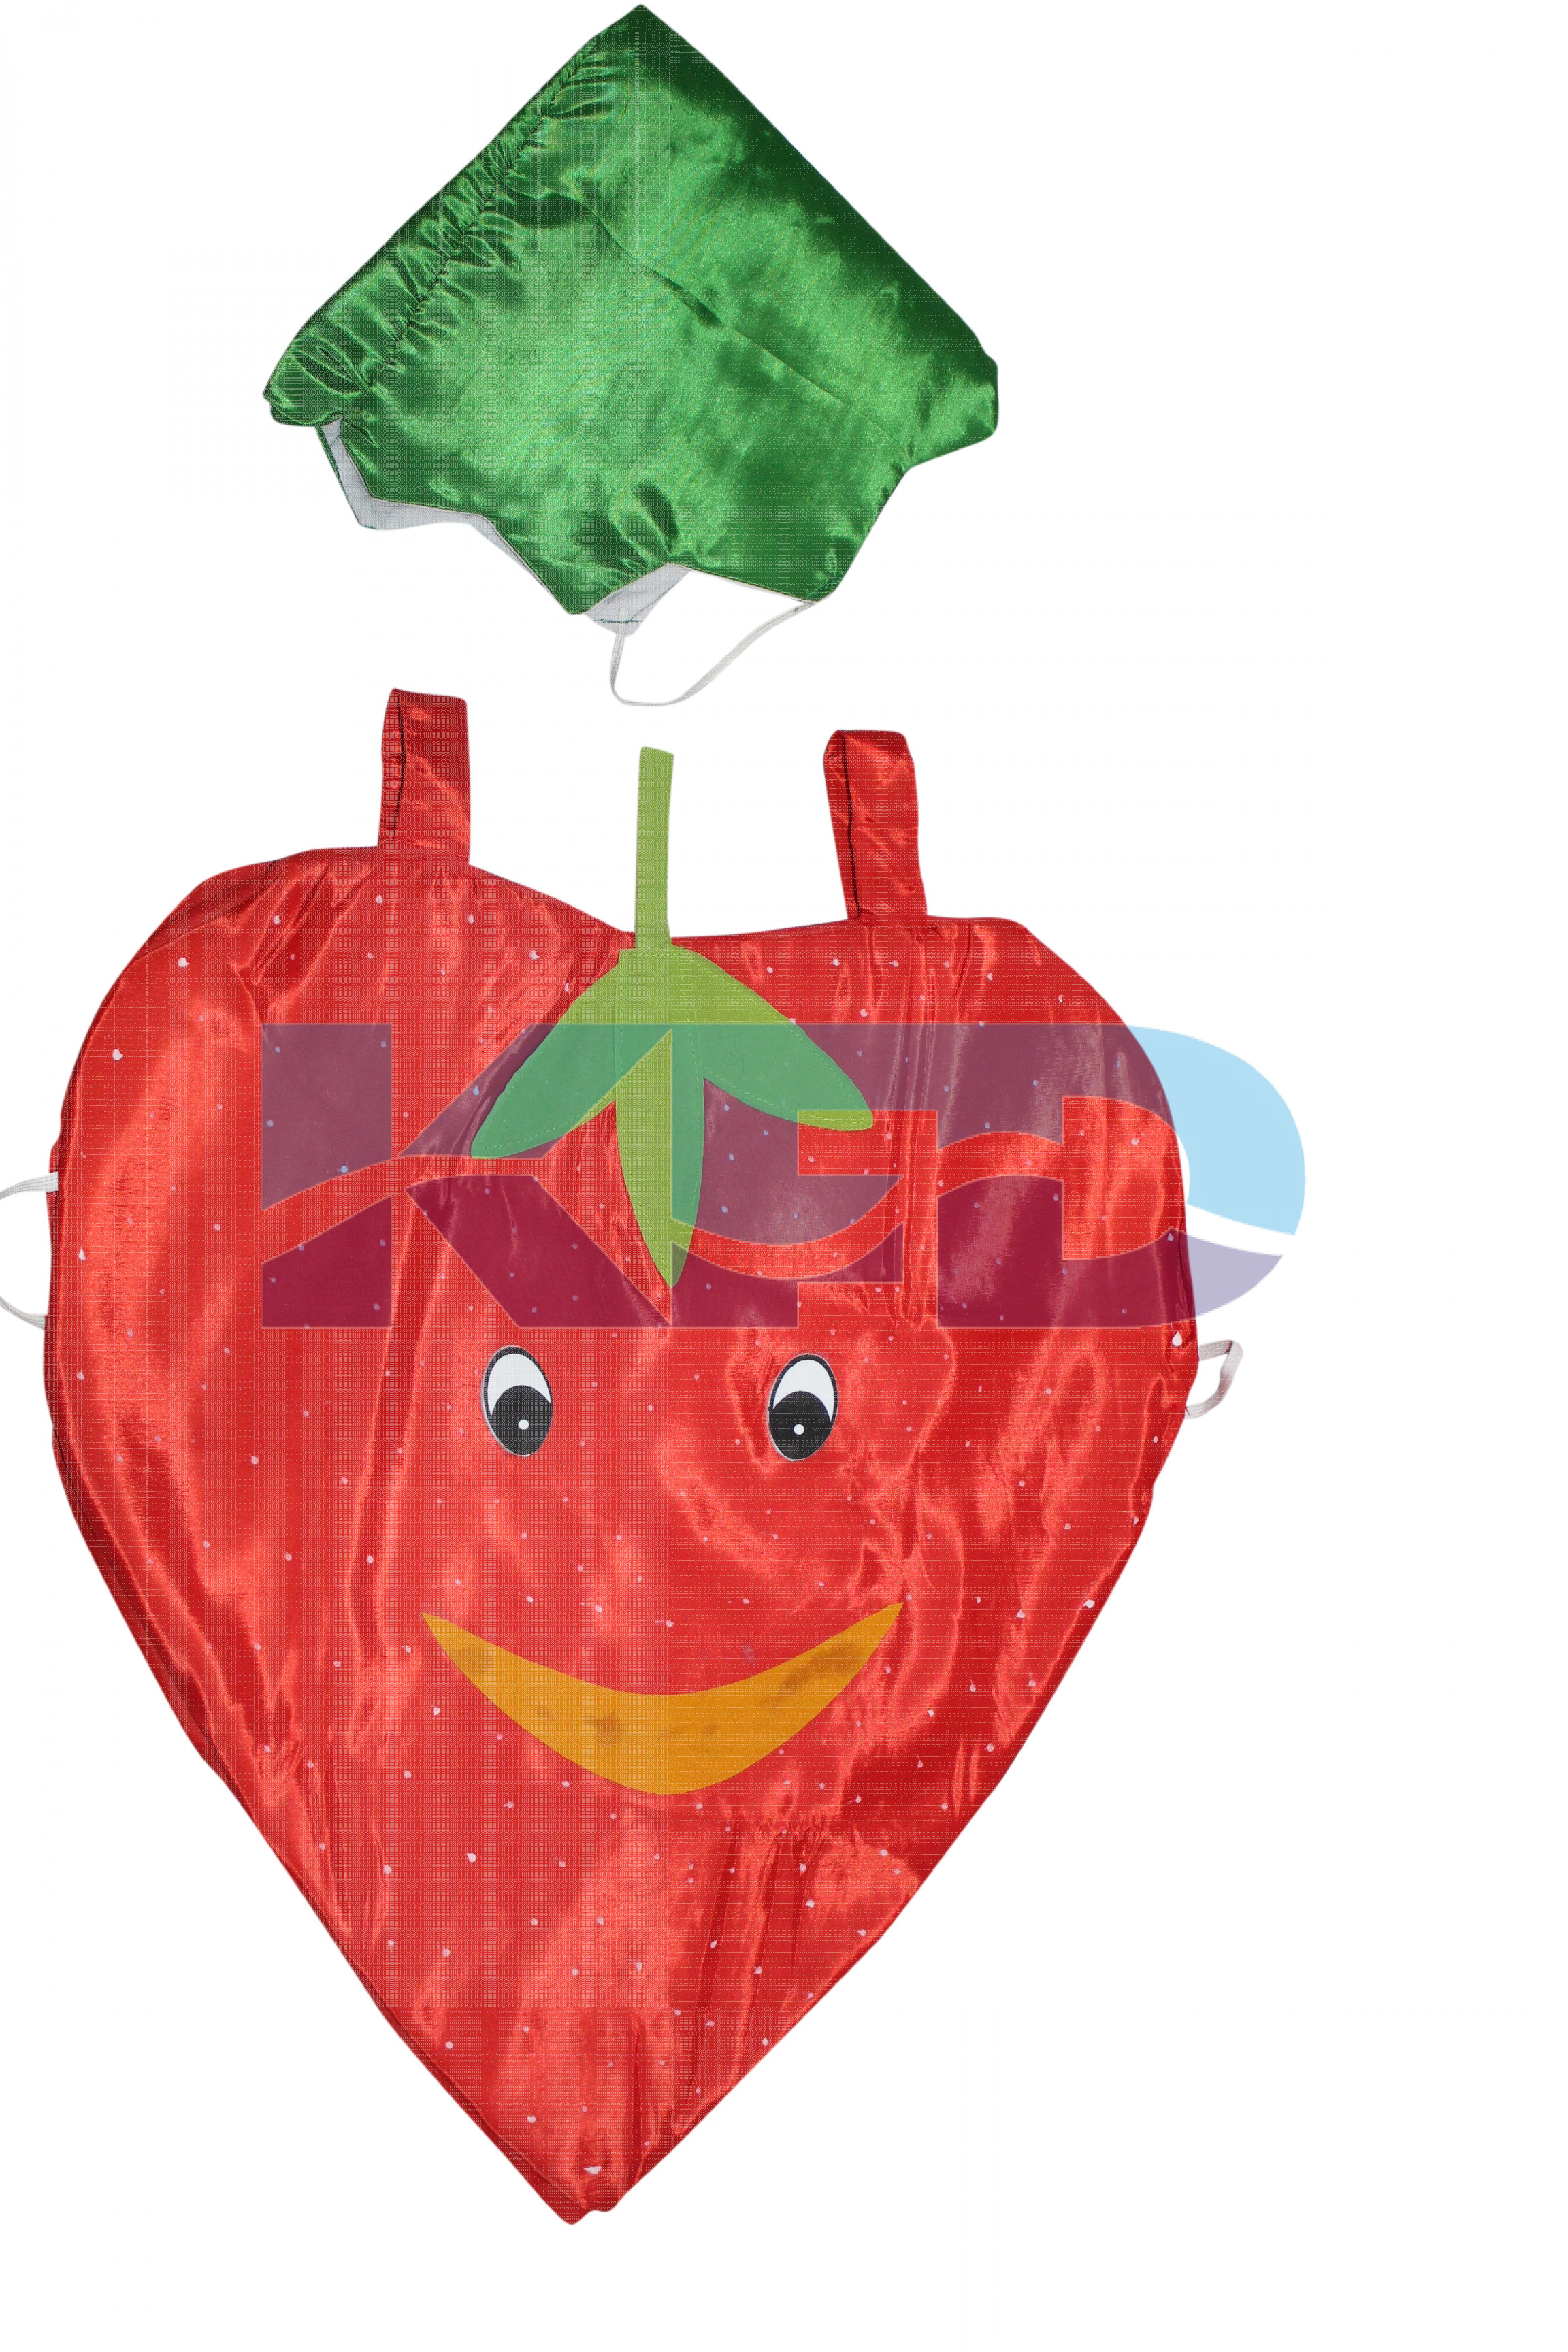  Strawberry Fruits Costume only cutout with Cap for Annual function/Theme Party/Competition/Stage Shows/Birthday Party Dress